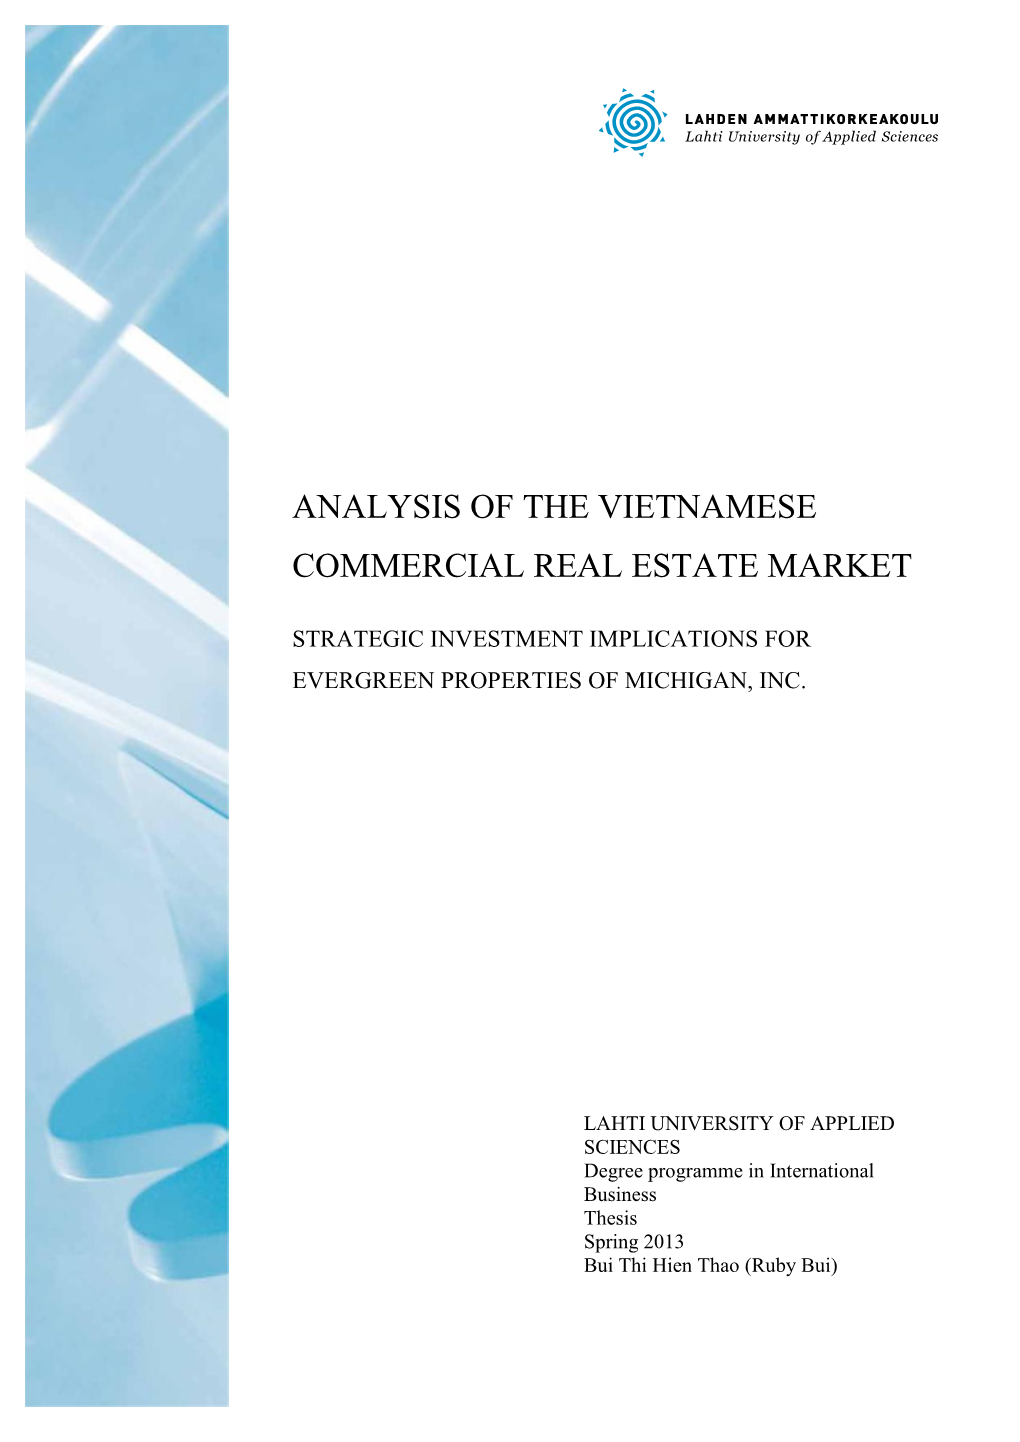 Analysis of the Vietnamese Commercial Real Estate Market